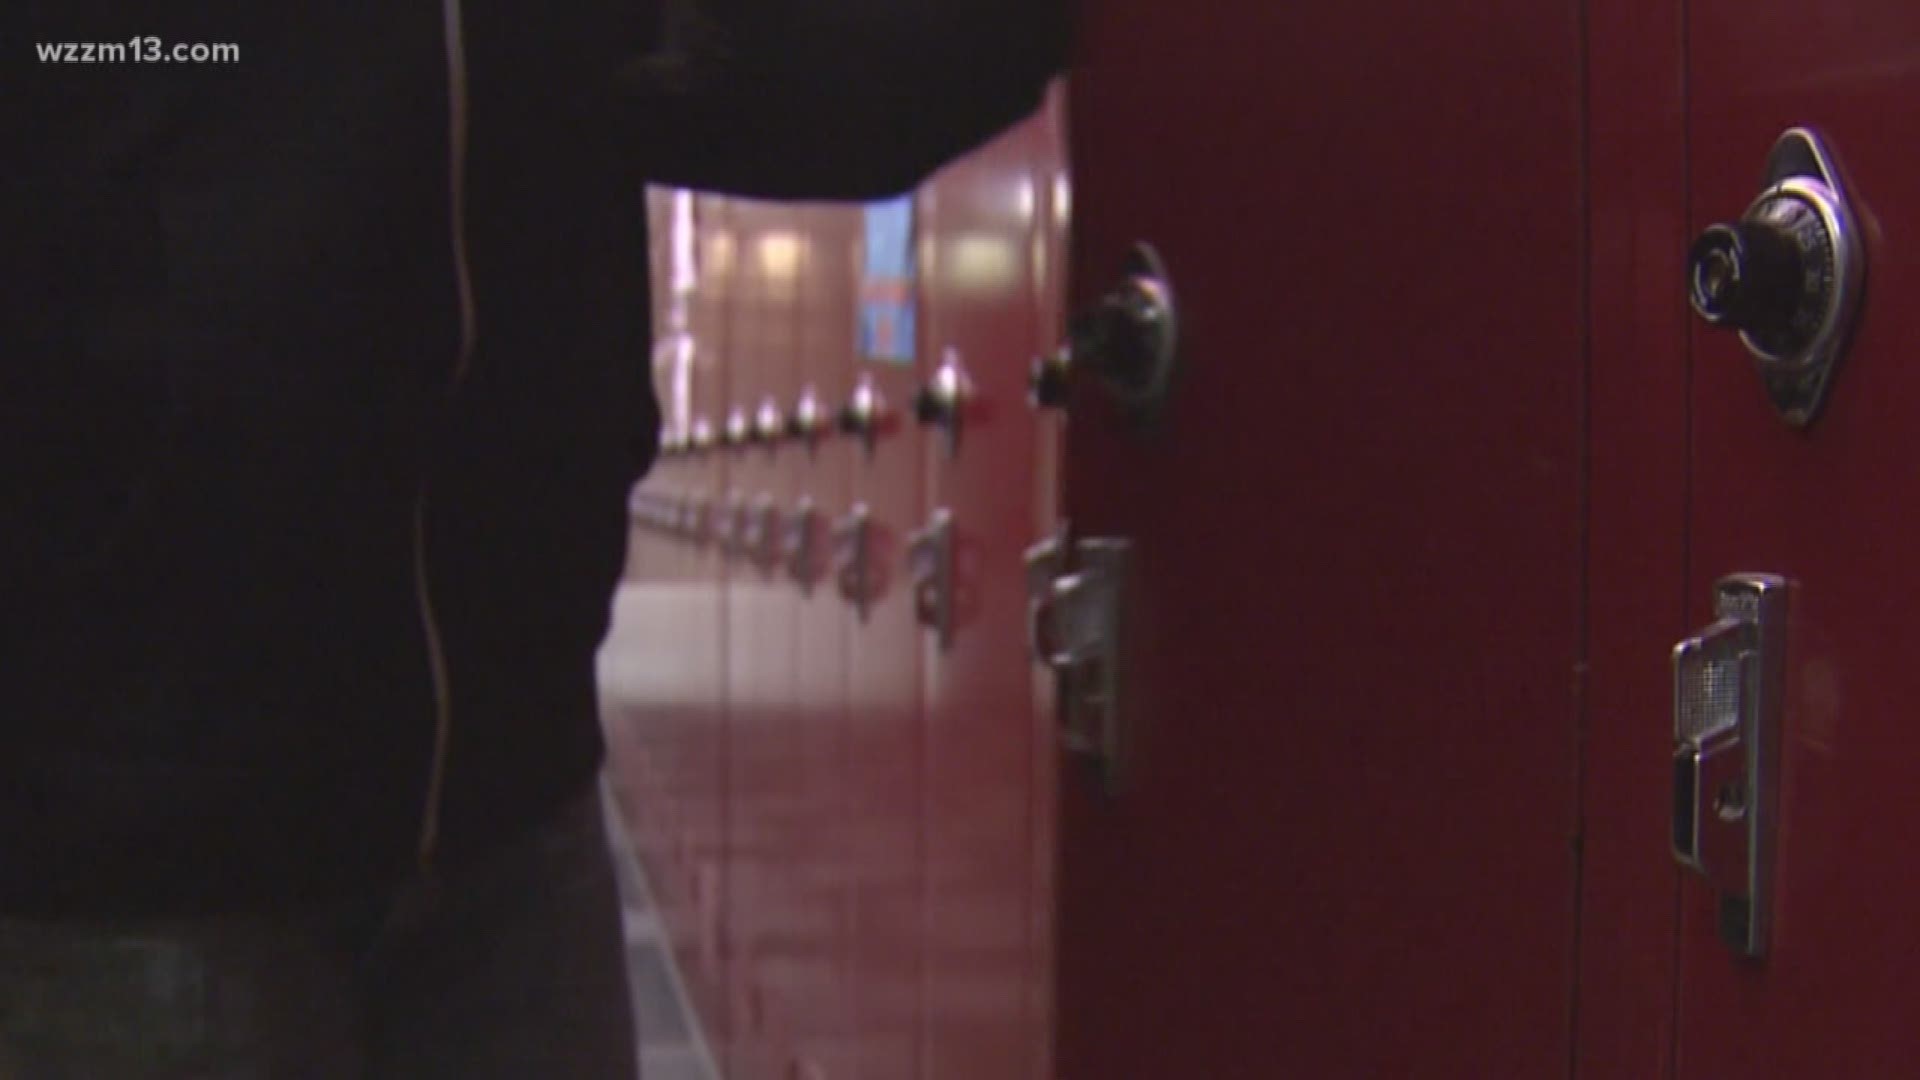 The new system is to hold schools accountable, but opponents say the grading system is too simple and unfair.